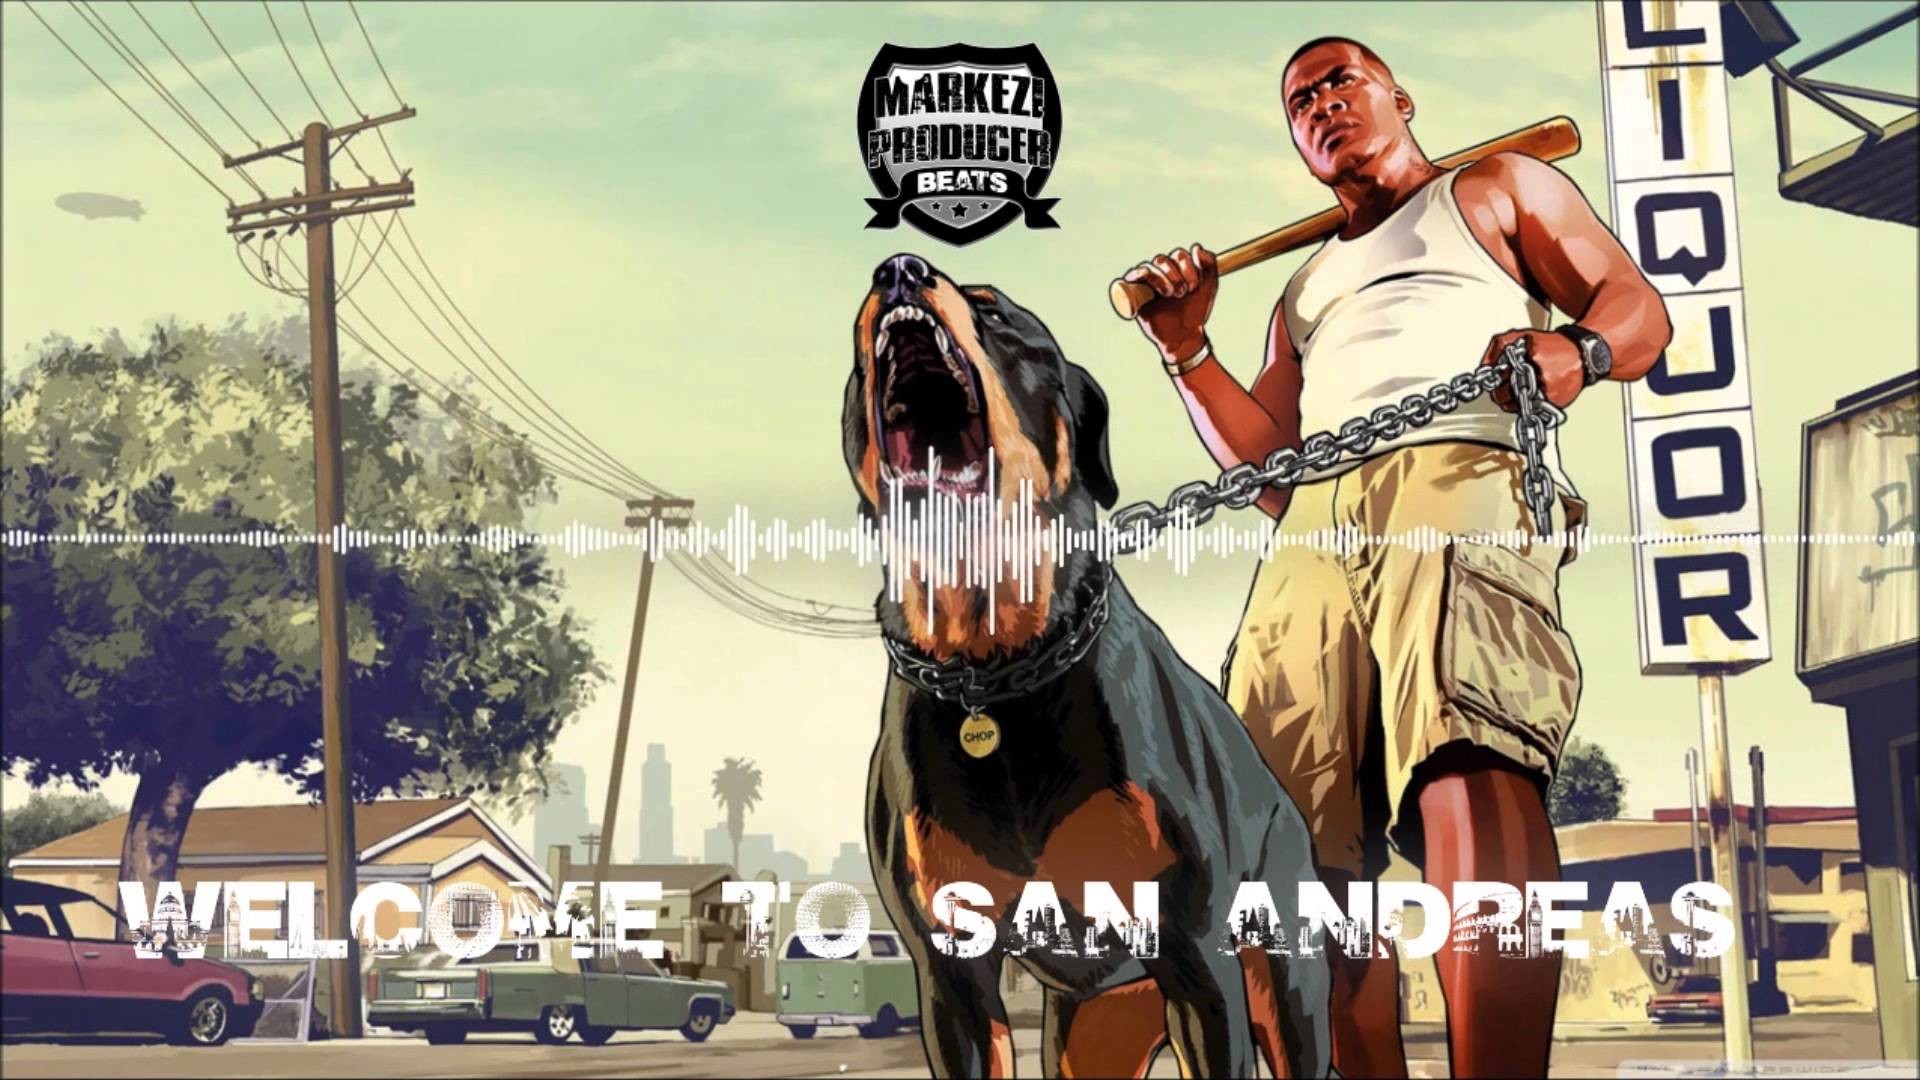 1920x1080 Epic West Coast / Hip Hop Type Beat [ WELCOME TO SAN ANDREAS ]